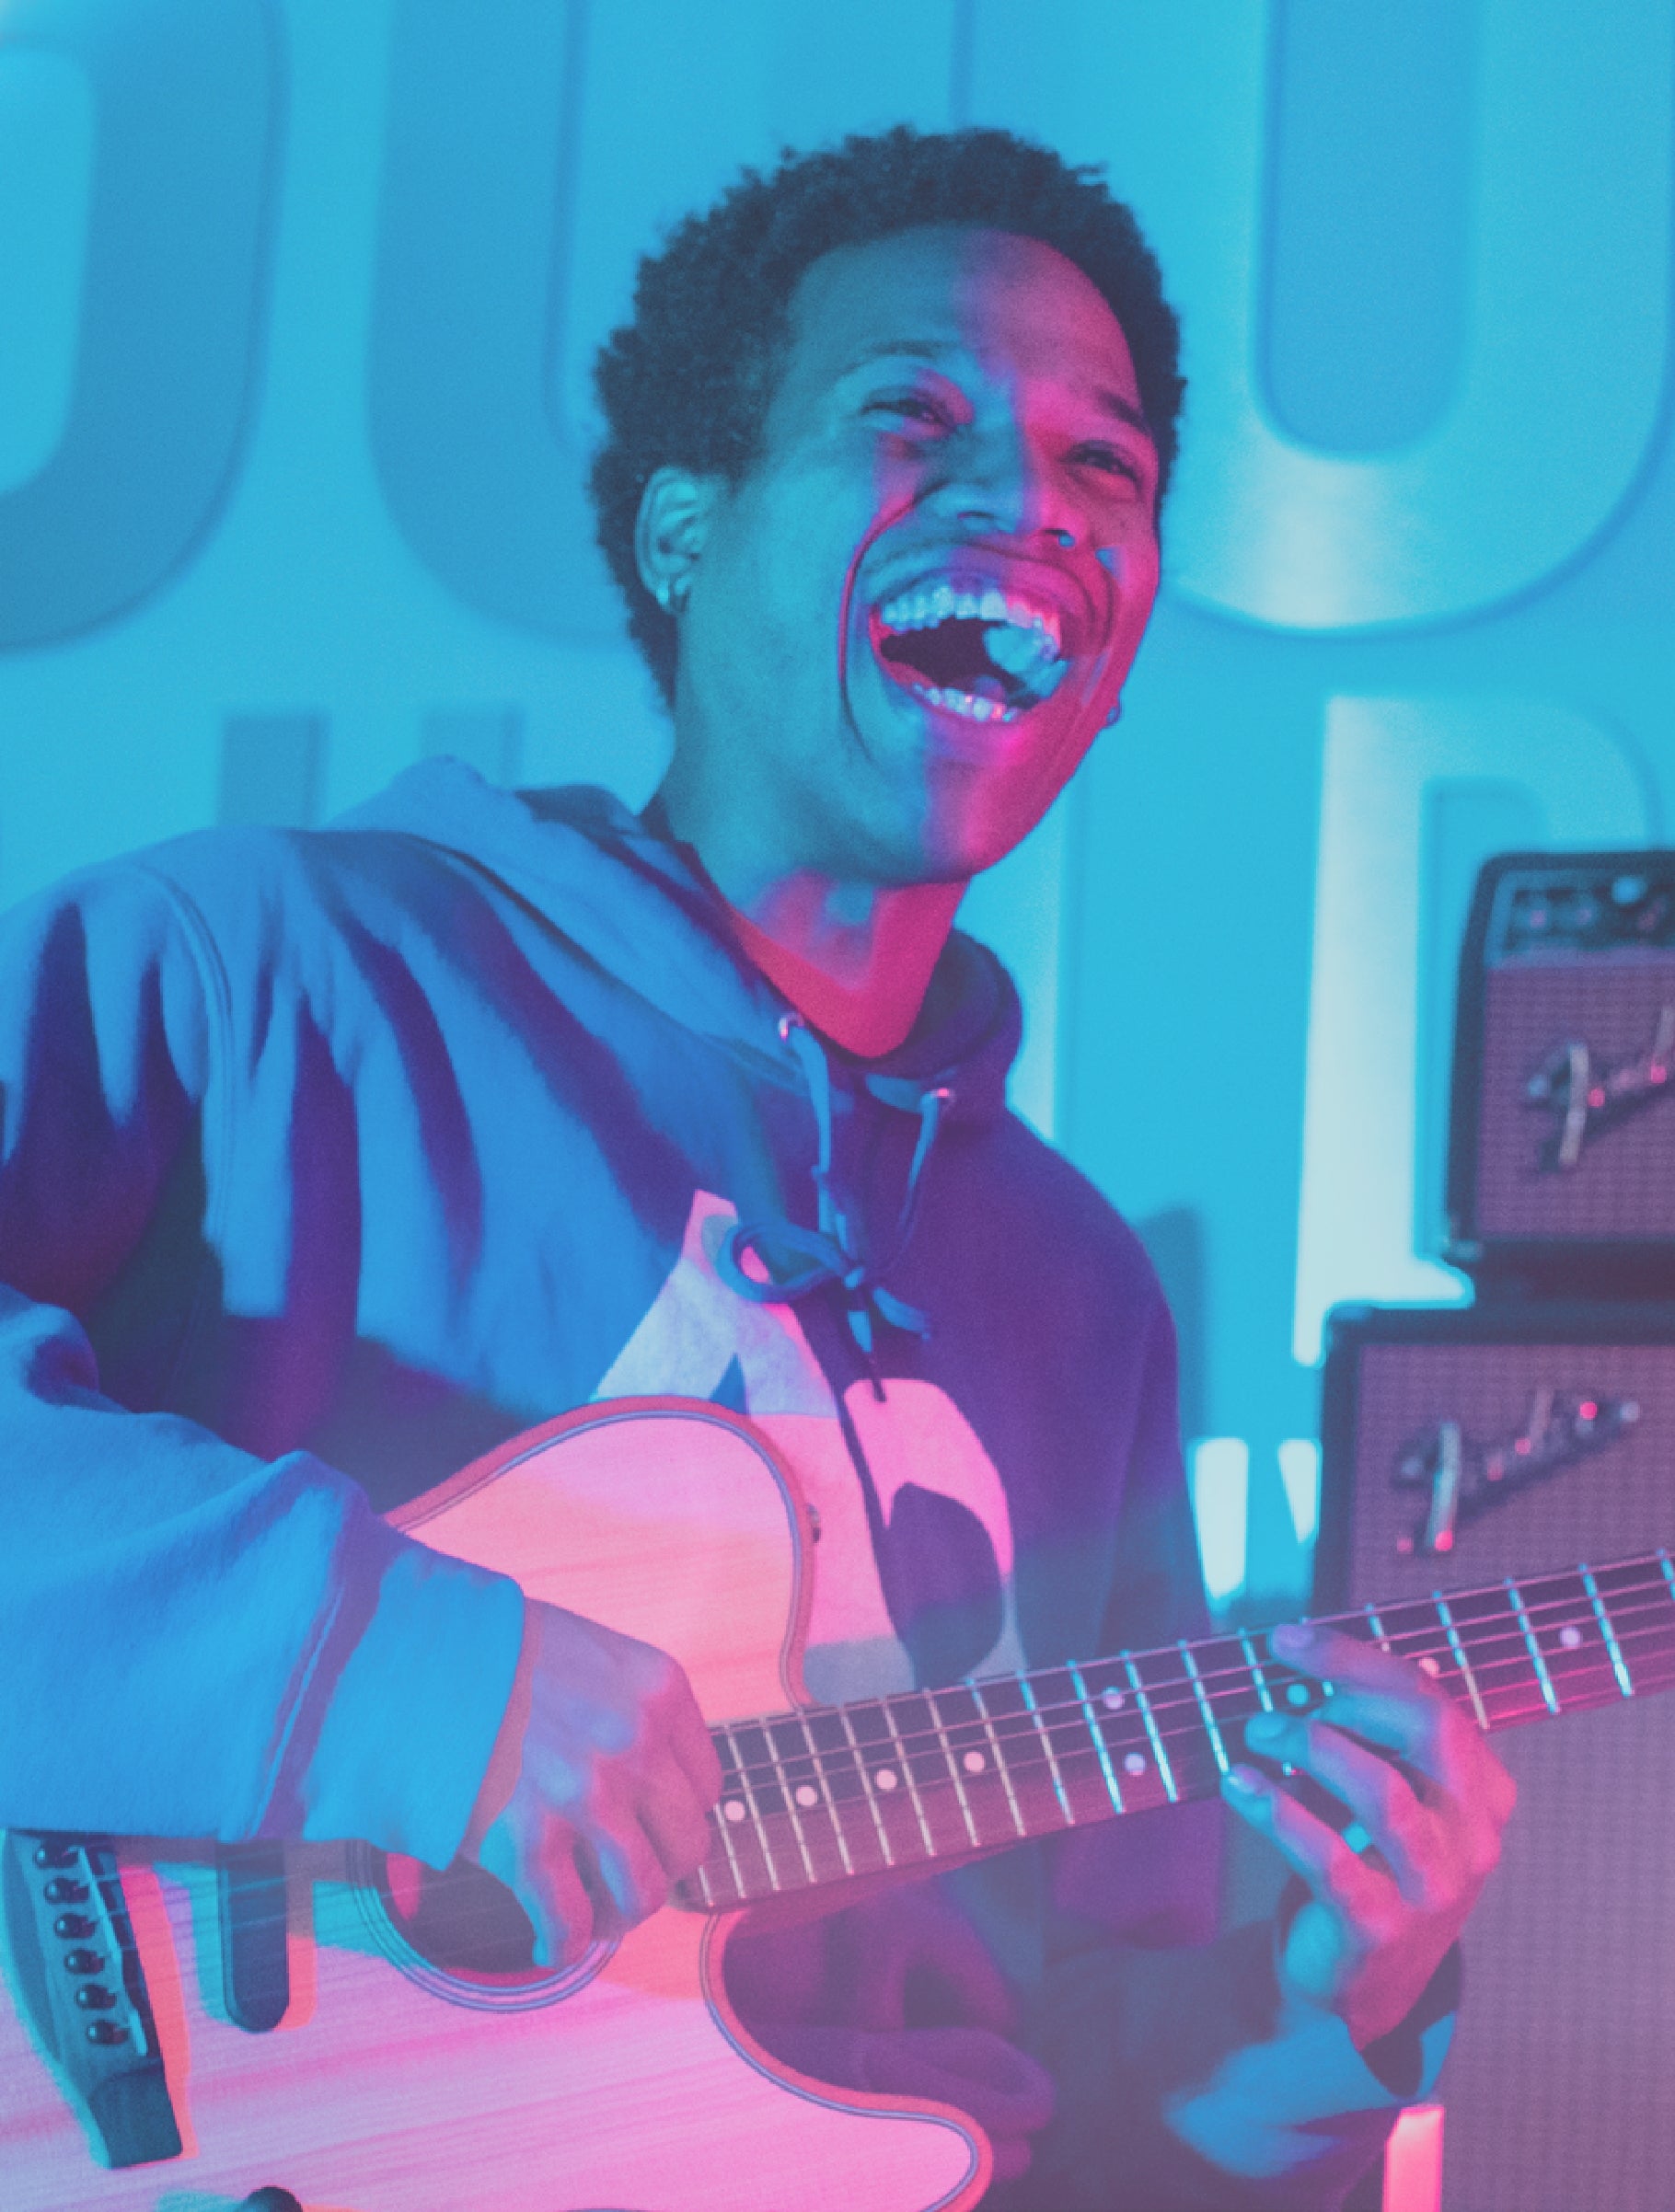 guy smiling holding a guitar